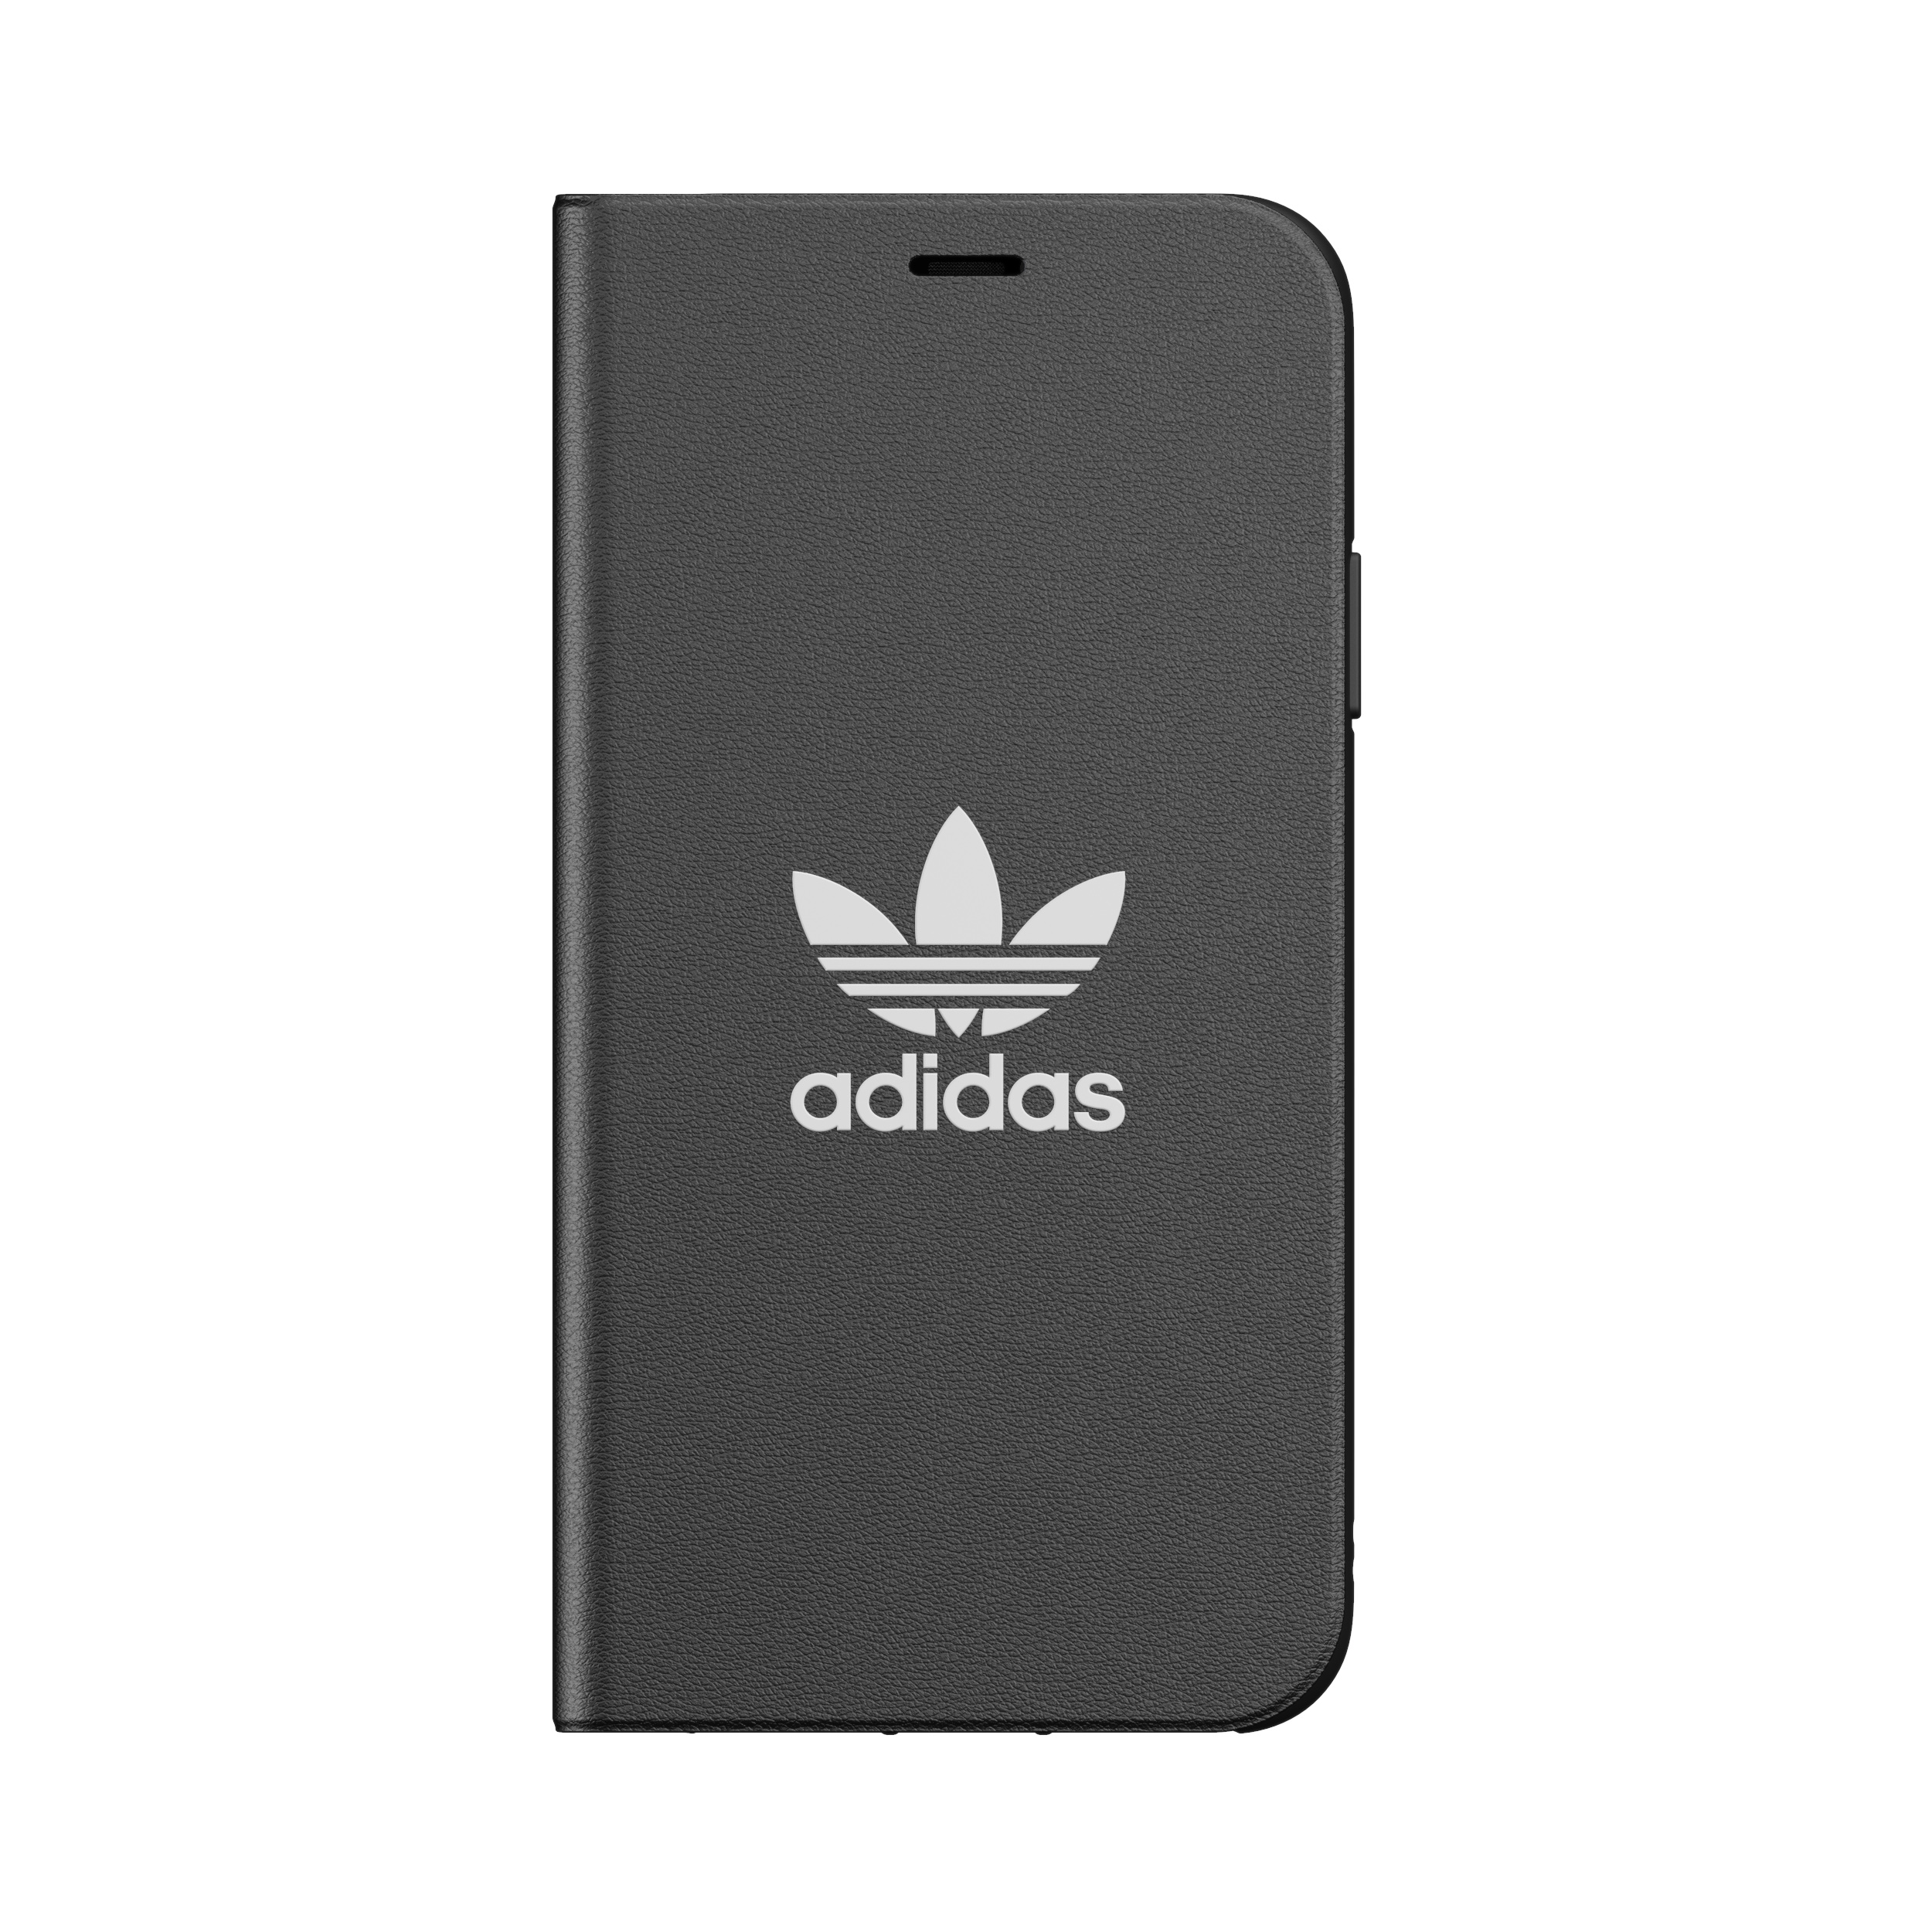 ADIDAS Booklet BLACK APPLE, BASIC, IPHONE Case PRO Bookcover, 11 MAX